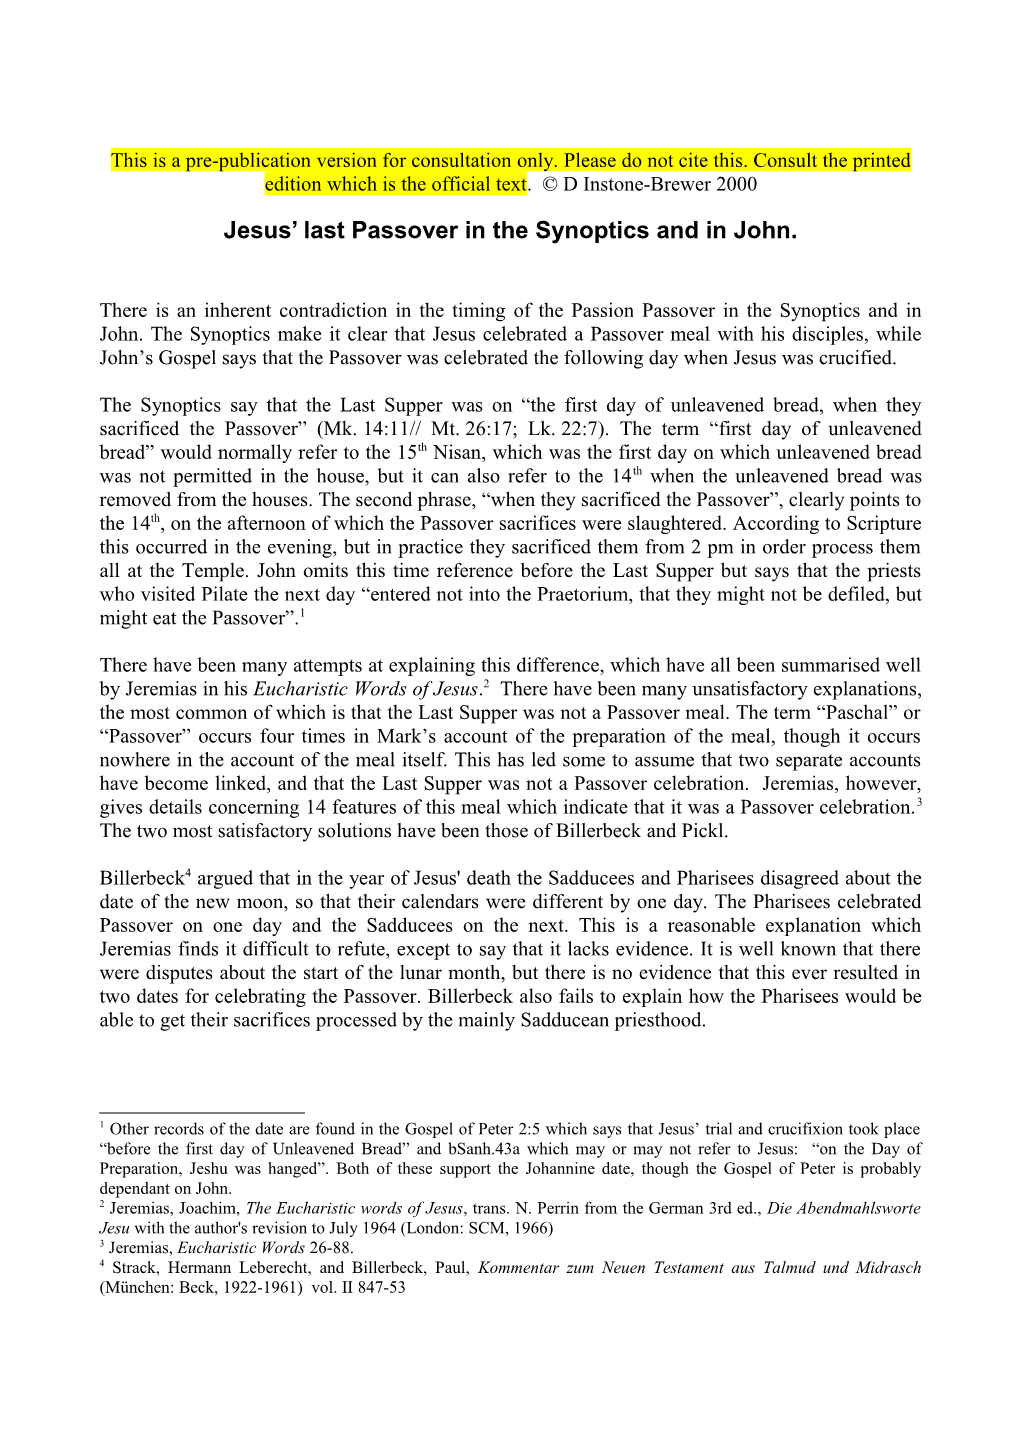 Short Paper: Jesus Last Passover in the Synoptics and in John